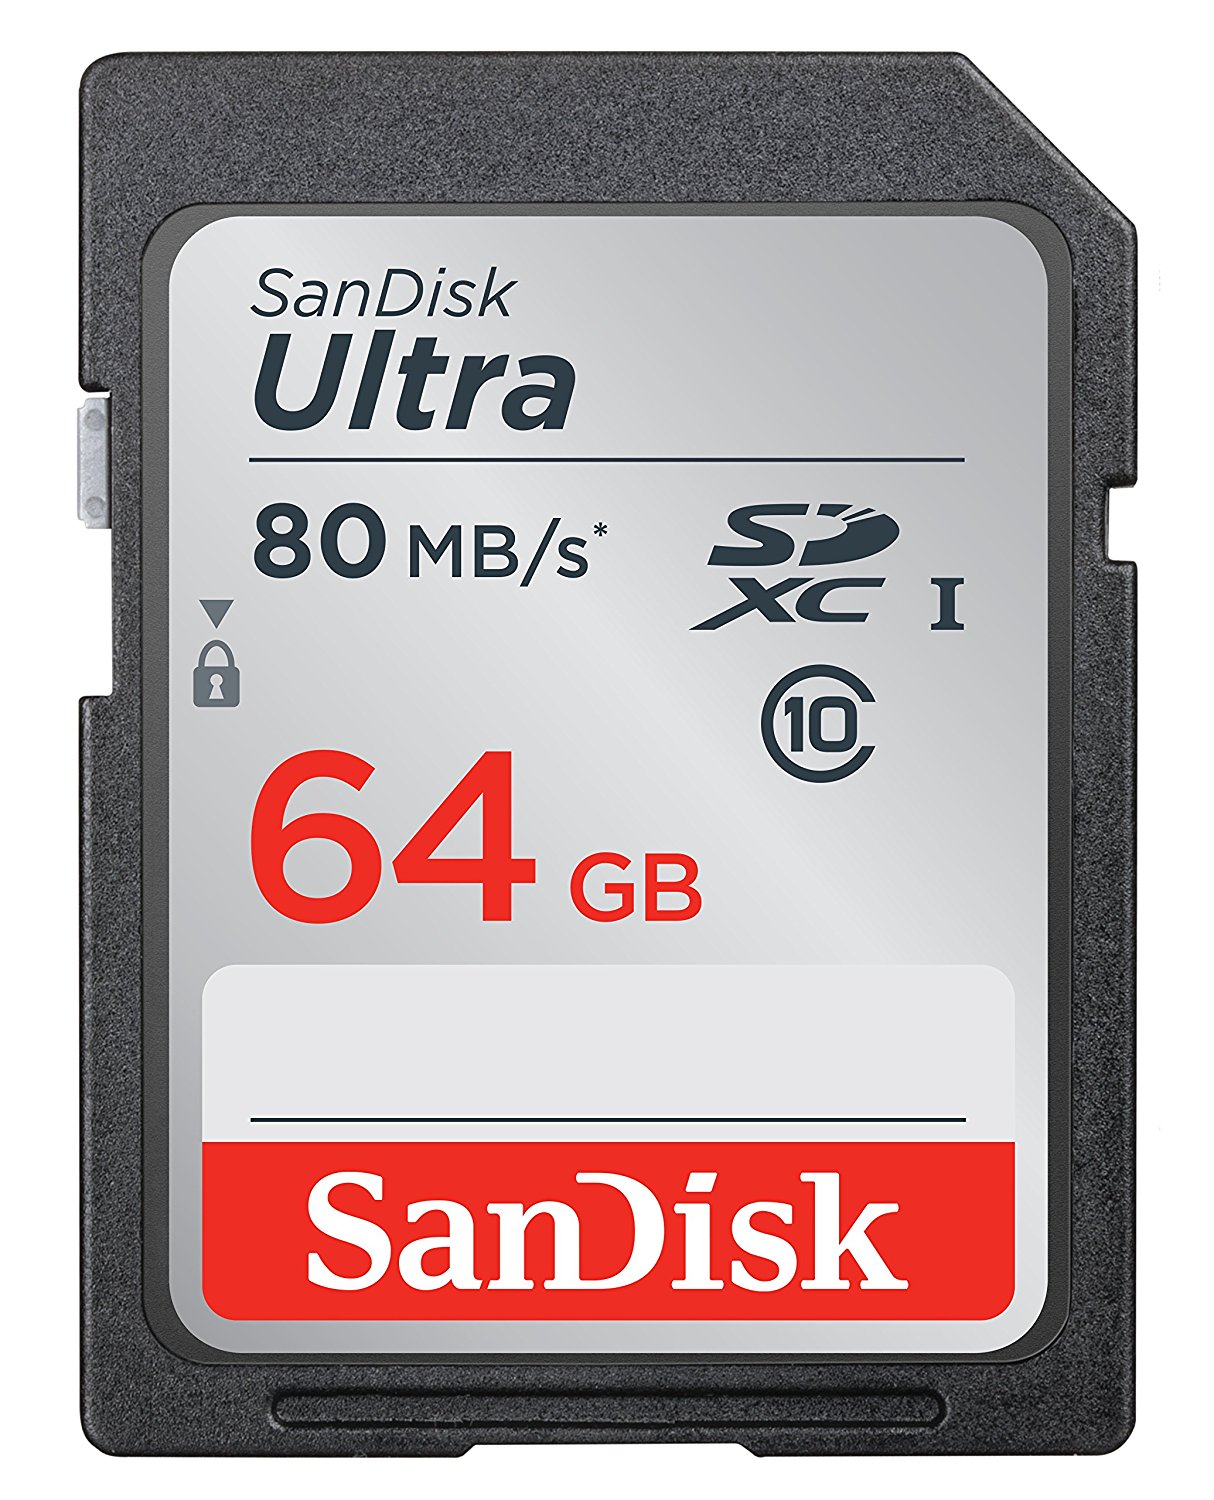 couples_coordinates_travel_electronics_gear_sandisk_64gb_memory_card